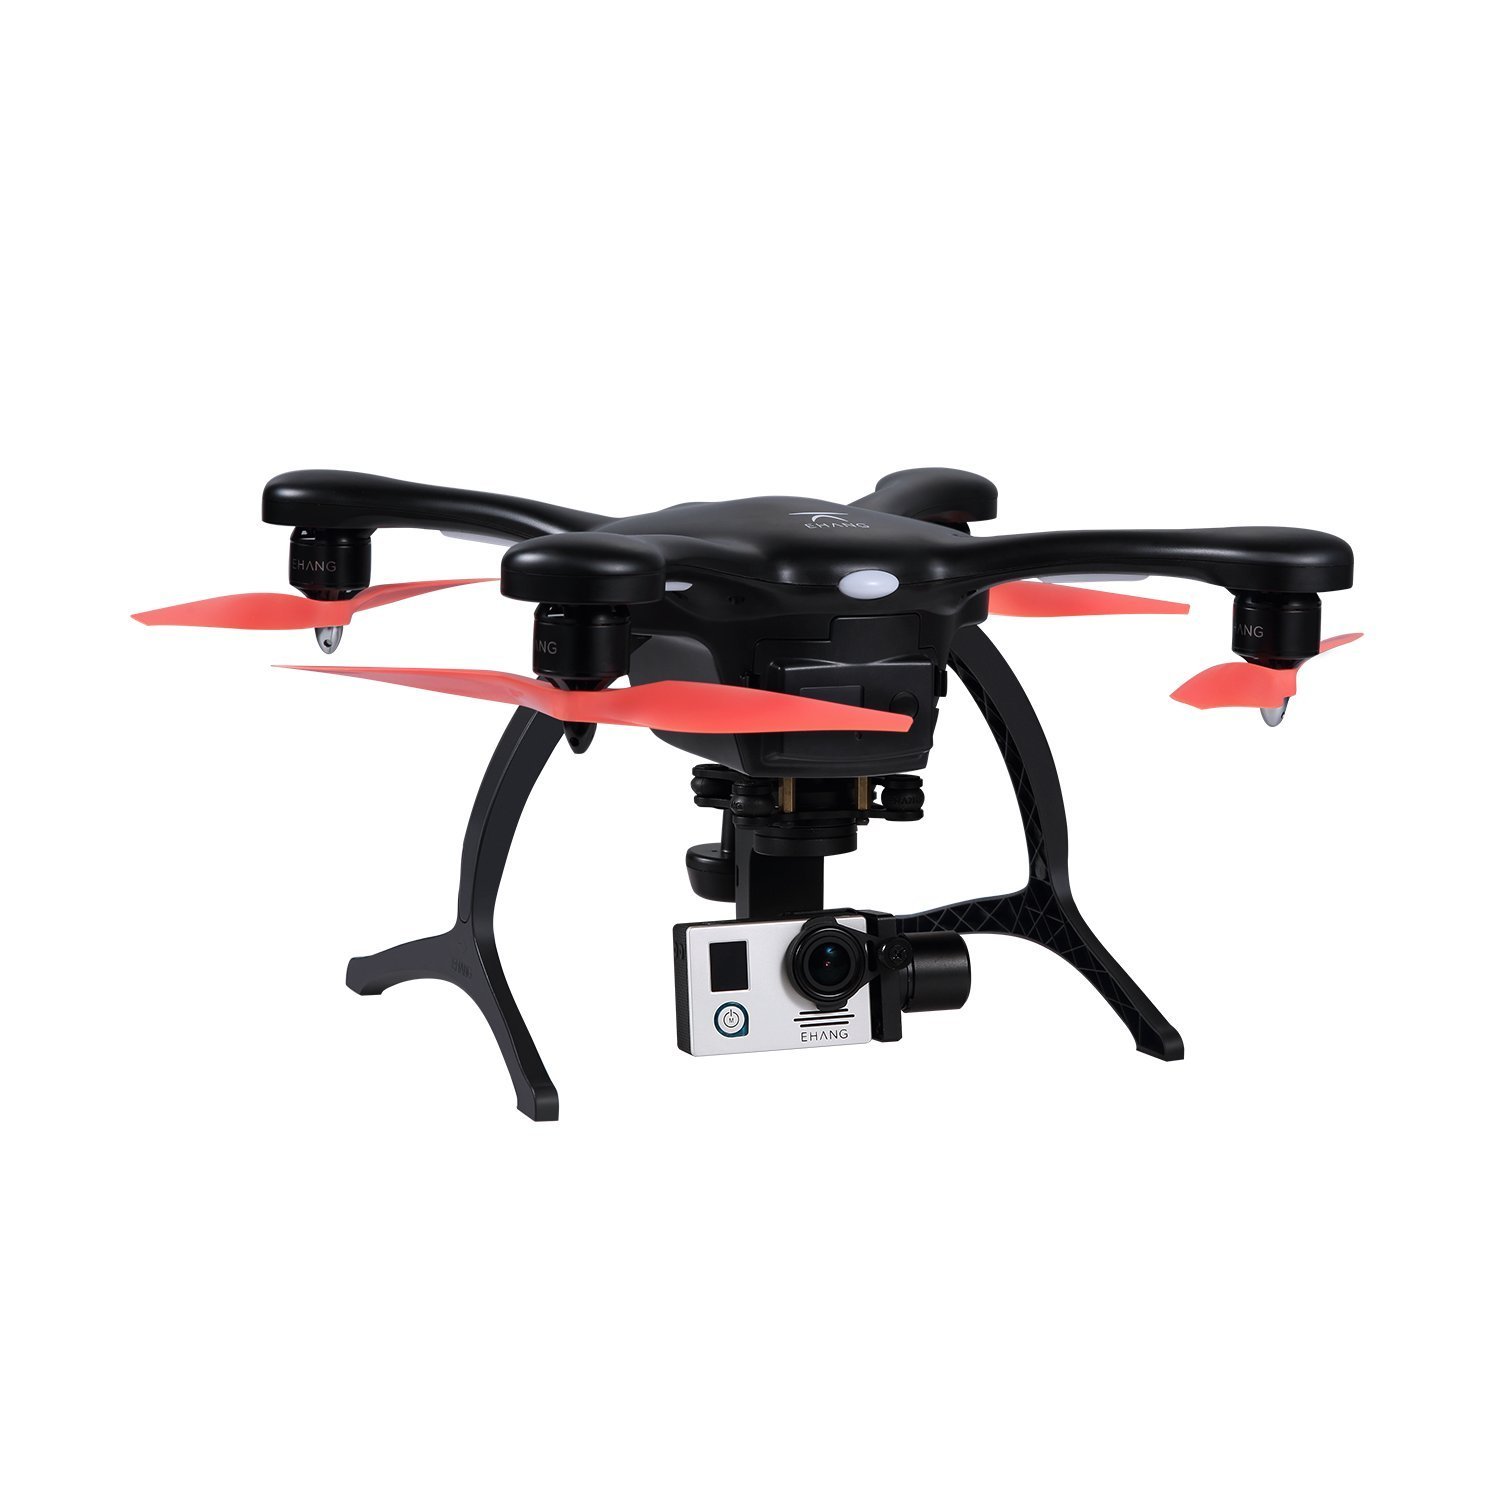 Save on Ehang GHOSTDRONE 2.0 Aerial with 4K Sports Camera – Just $284.99!